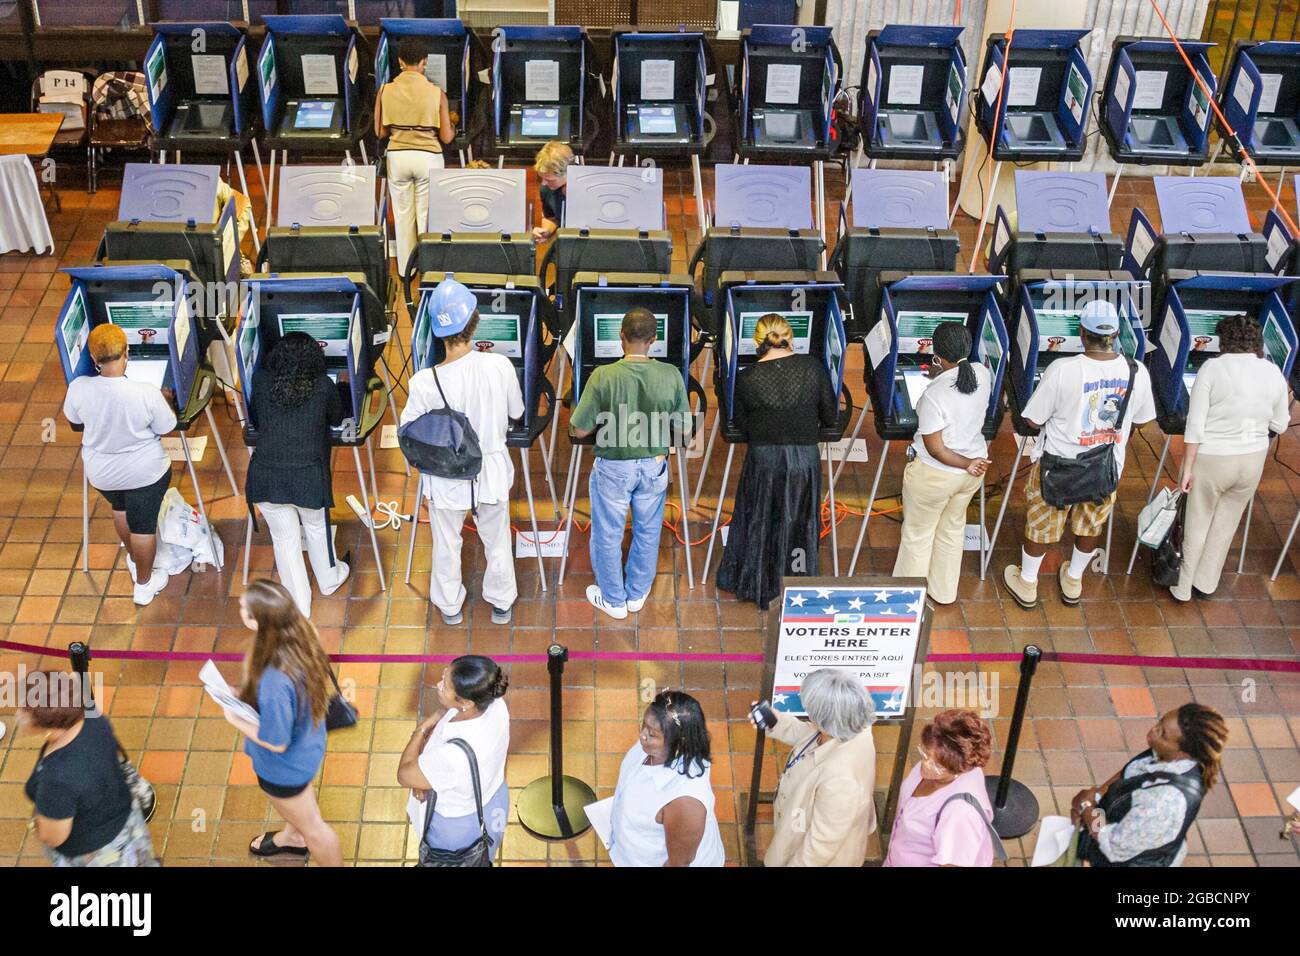 Miami Florida,Stephen P. Clark Government Center,presidential election early voters vote votes voting,touch screen booths overhead view from above Stock Photo